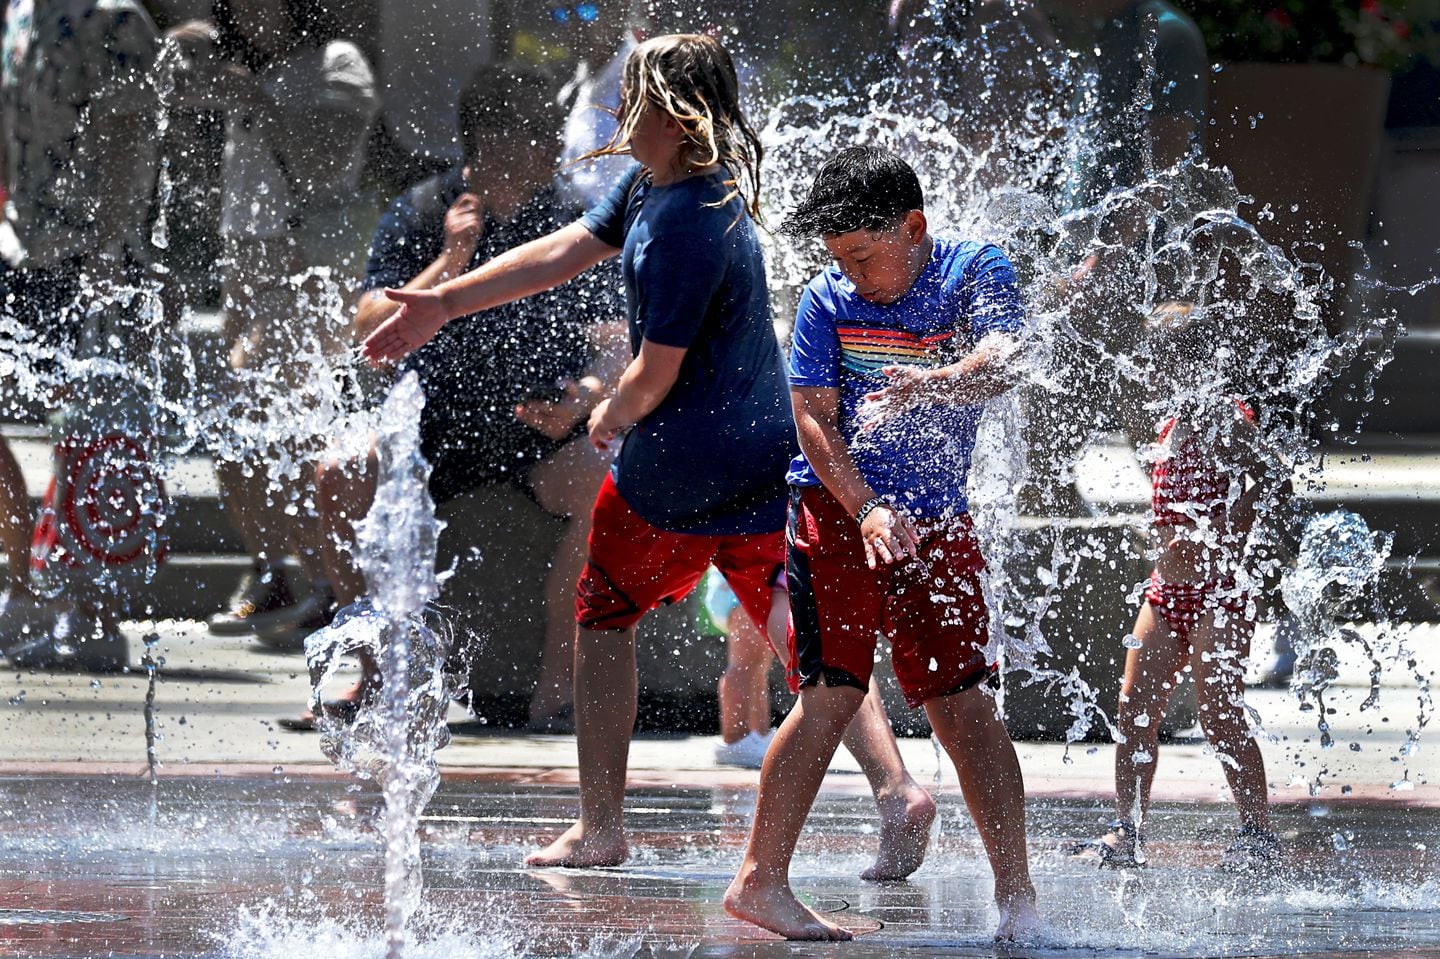 New England is bracing for a heat wave next week that will send temperatures soaring to 90 and 100 degrees in many inland areas.